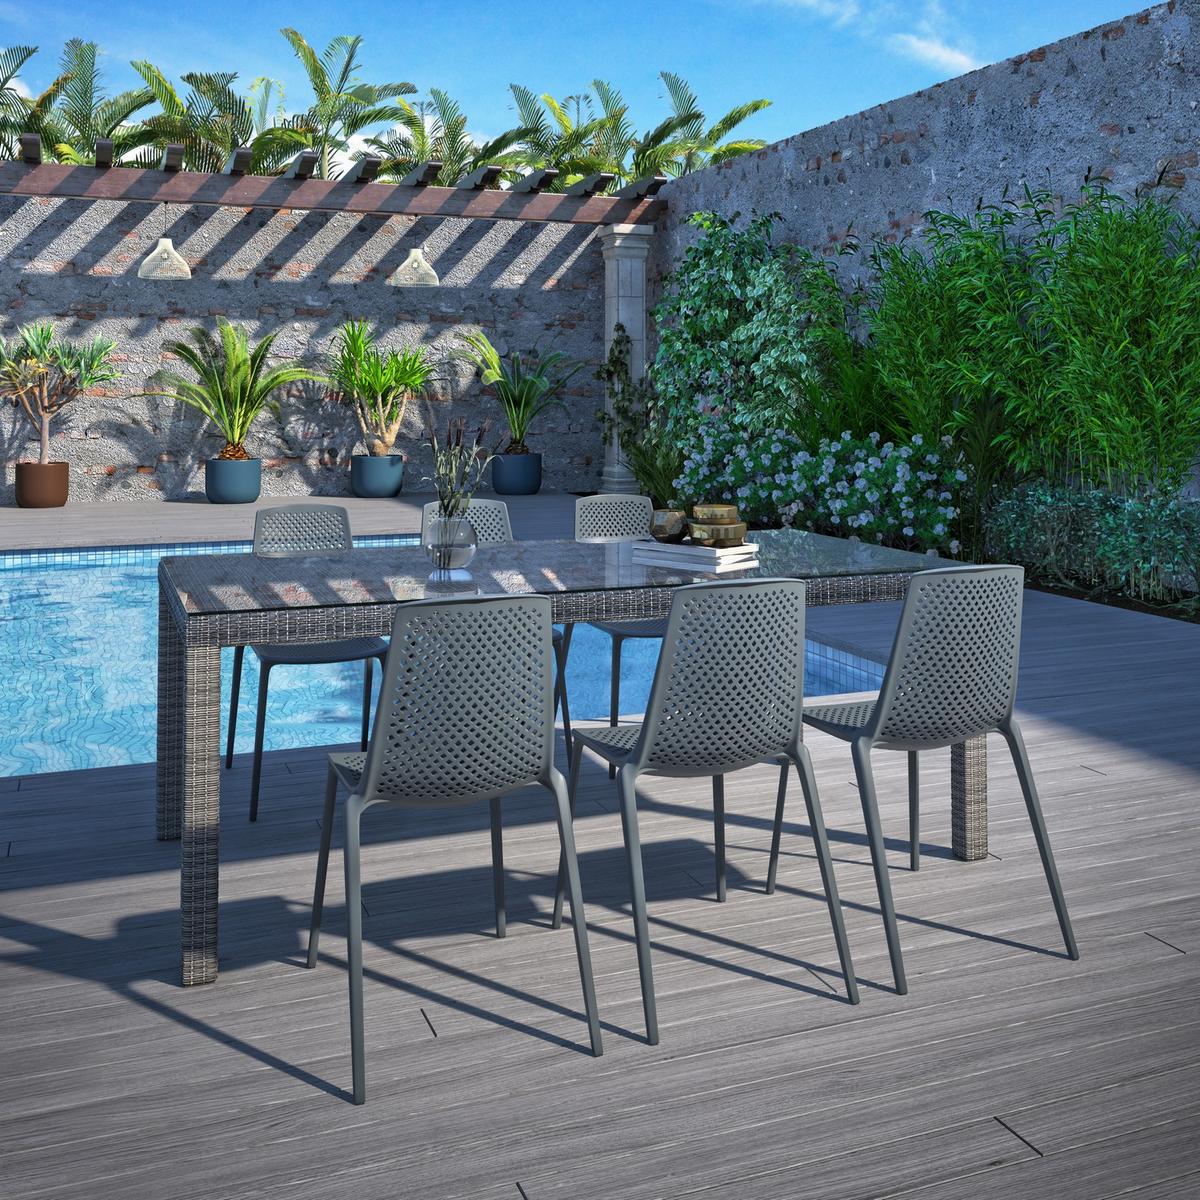 BRAND NEW OUTDOOR SYNTHETIC WICKER TABLE 83" x 43" WITH GLASS TOP + 6 RESIN STACKING CHAIRS GREY